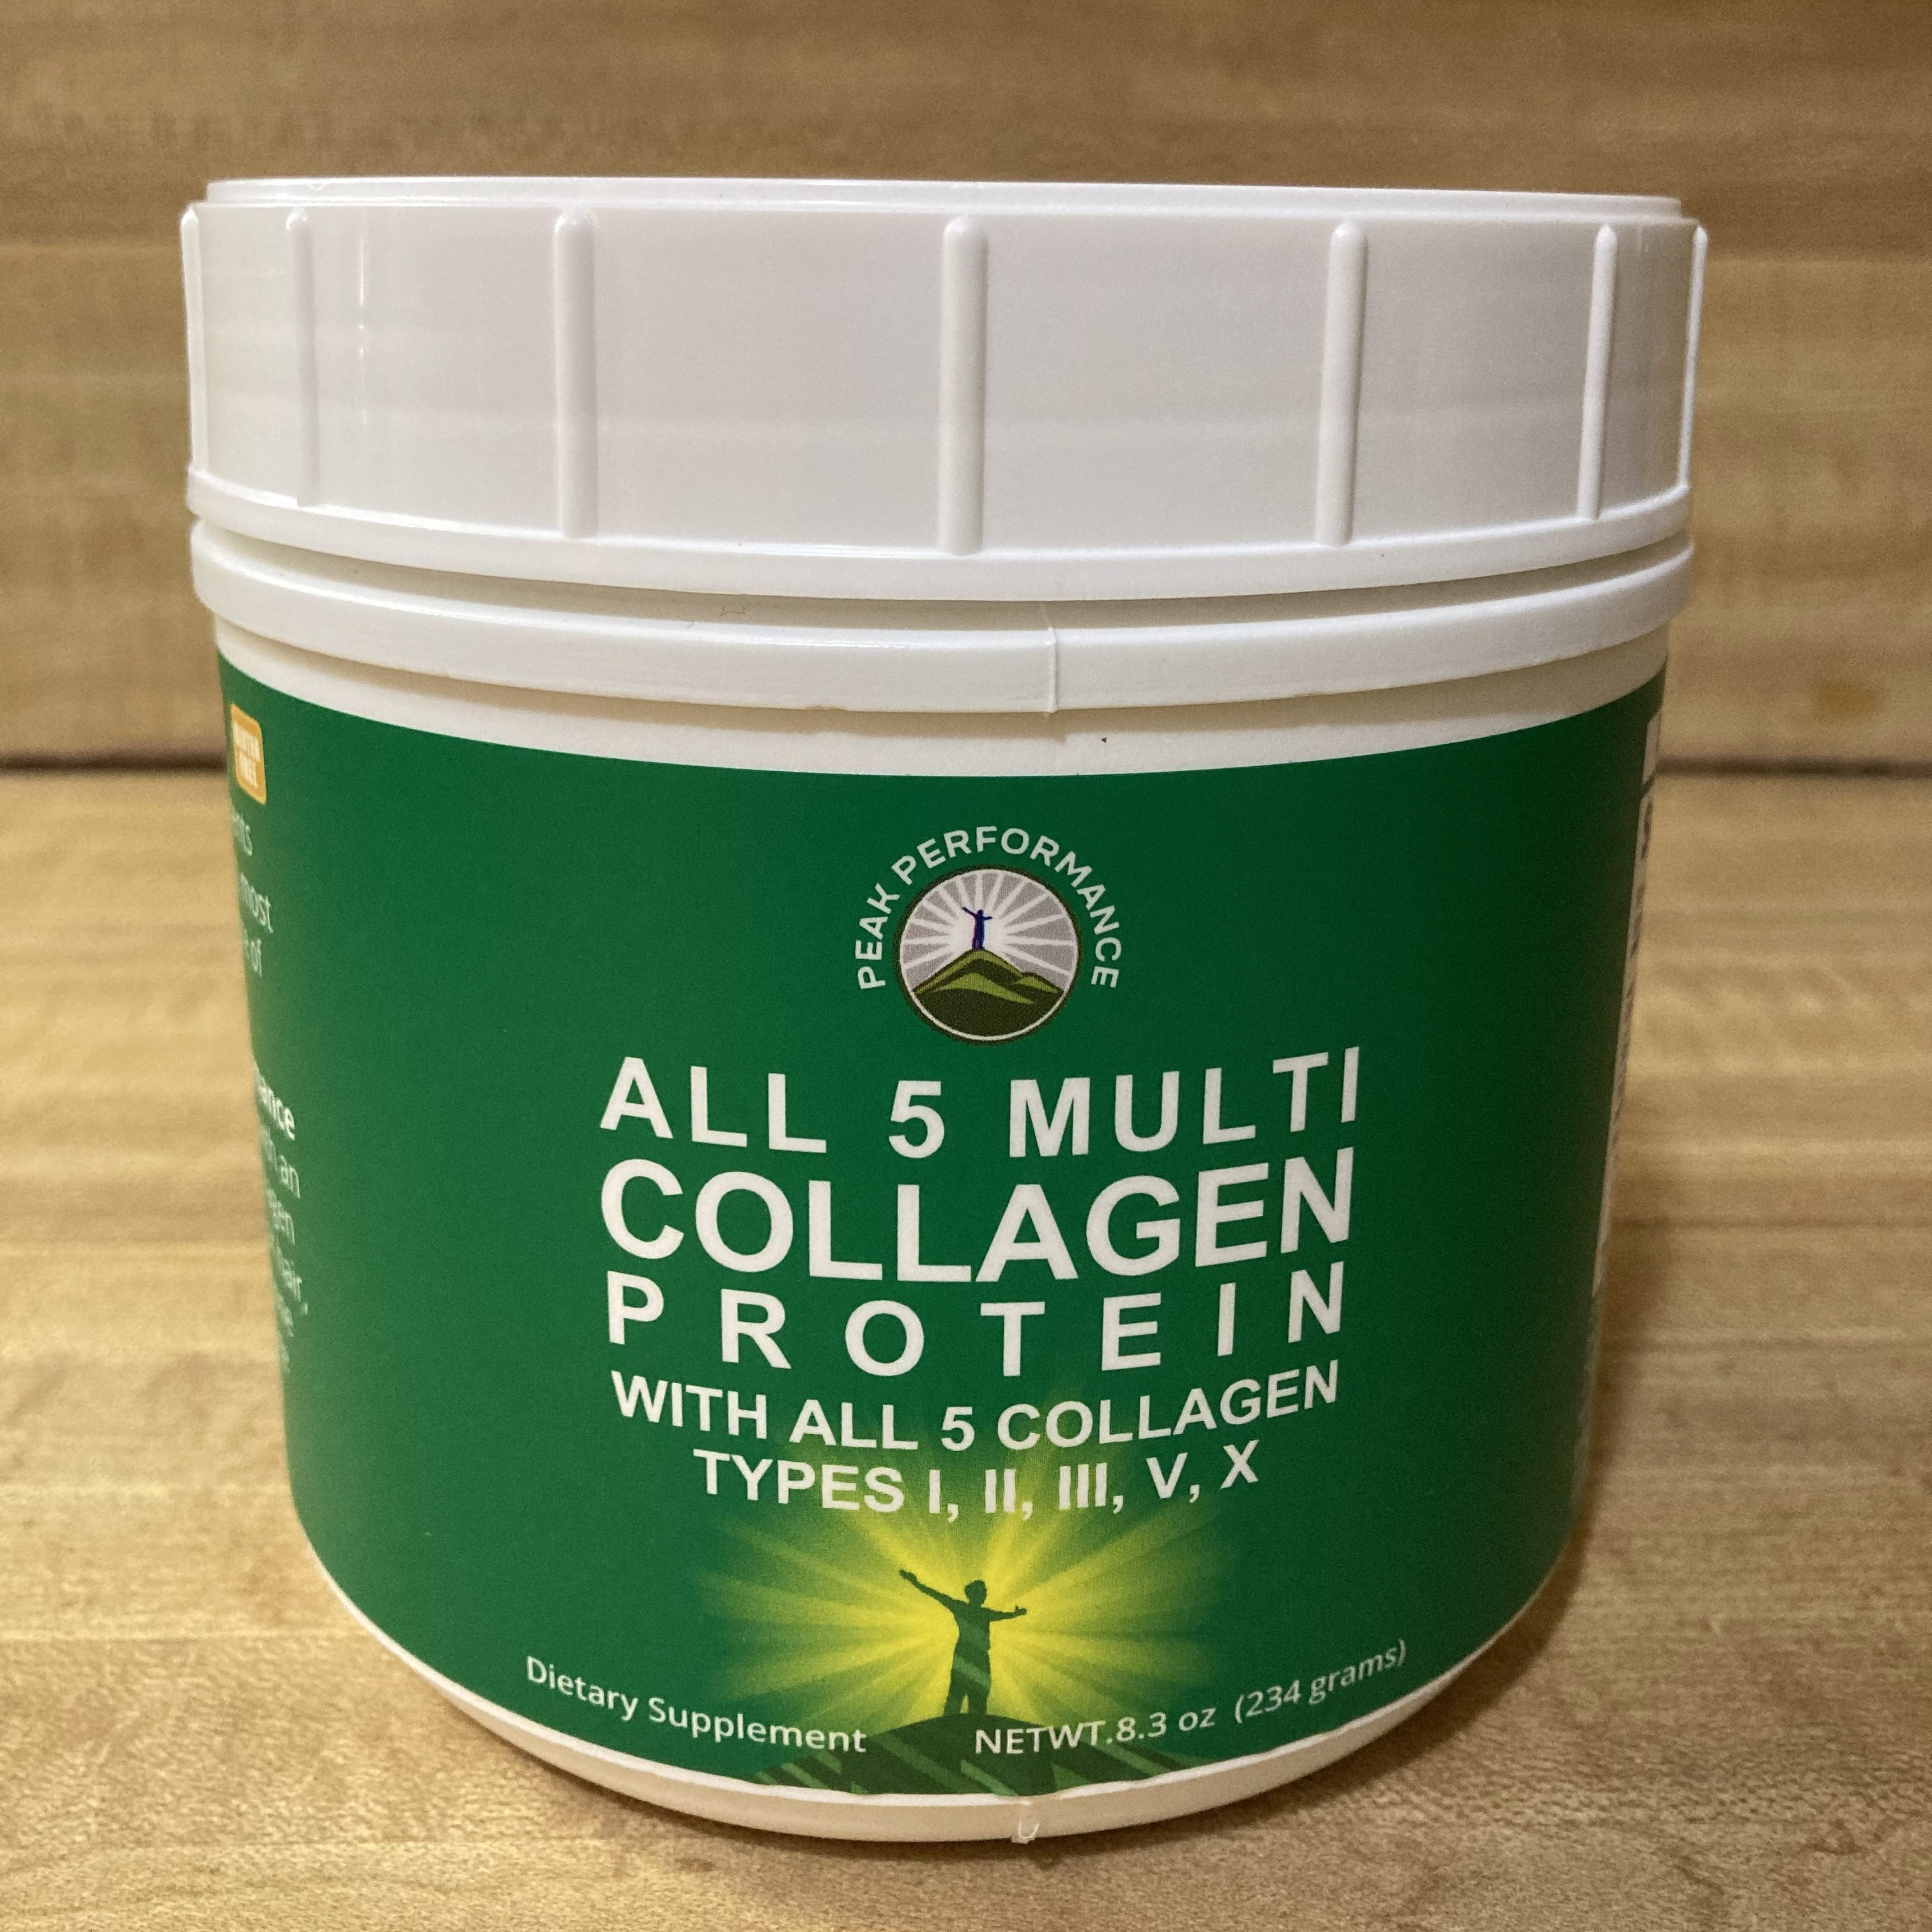 I Tried This 3x Sold Out Collagen Protein Powder to See What the Hype Was About – These Are My Thoughts